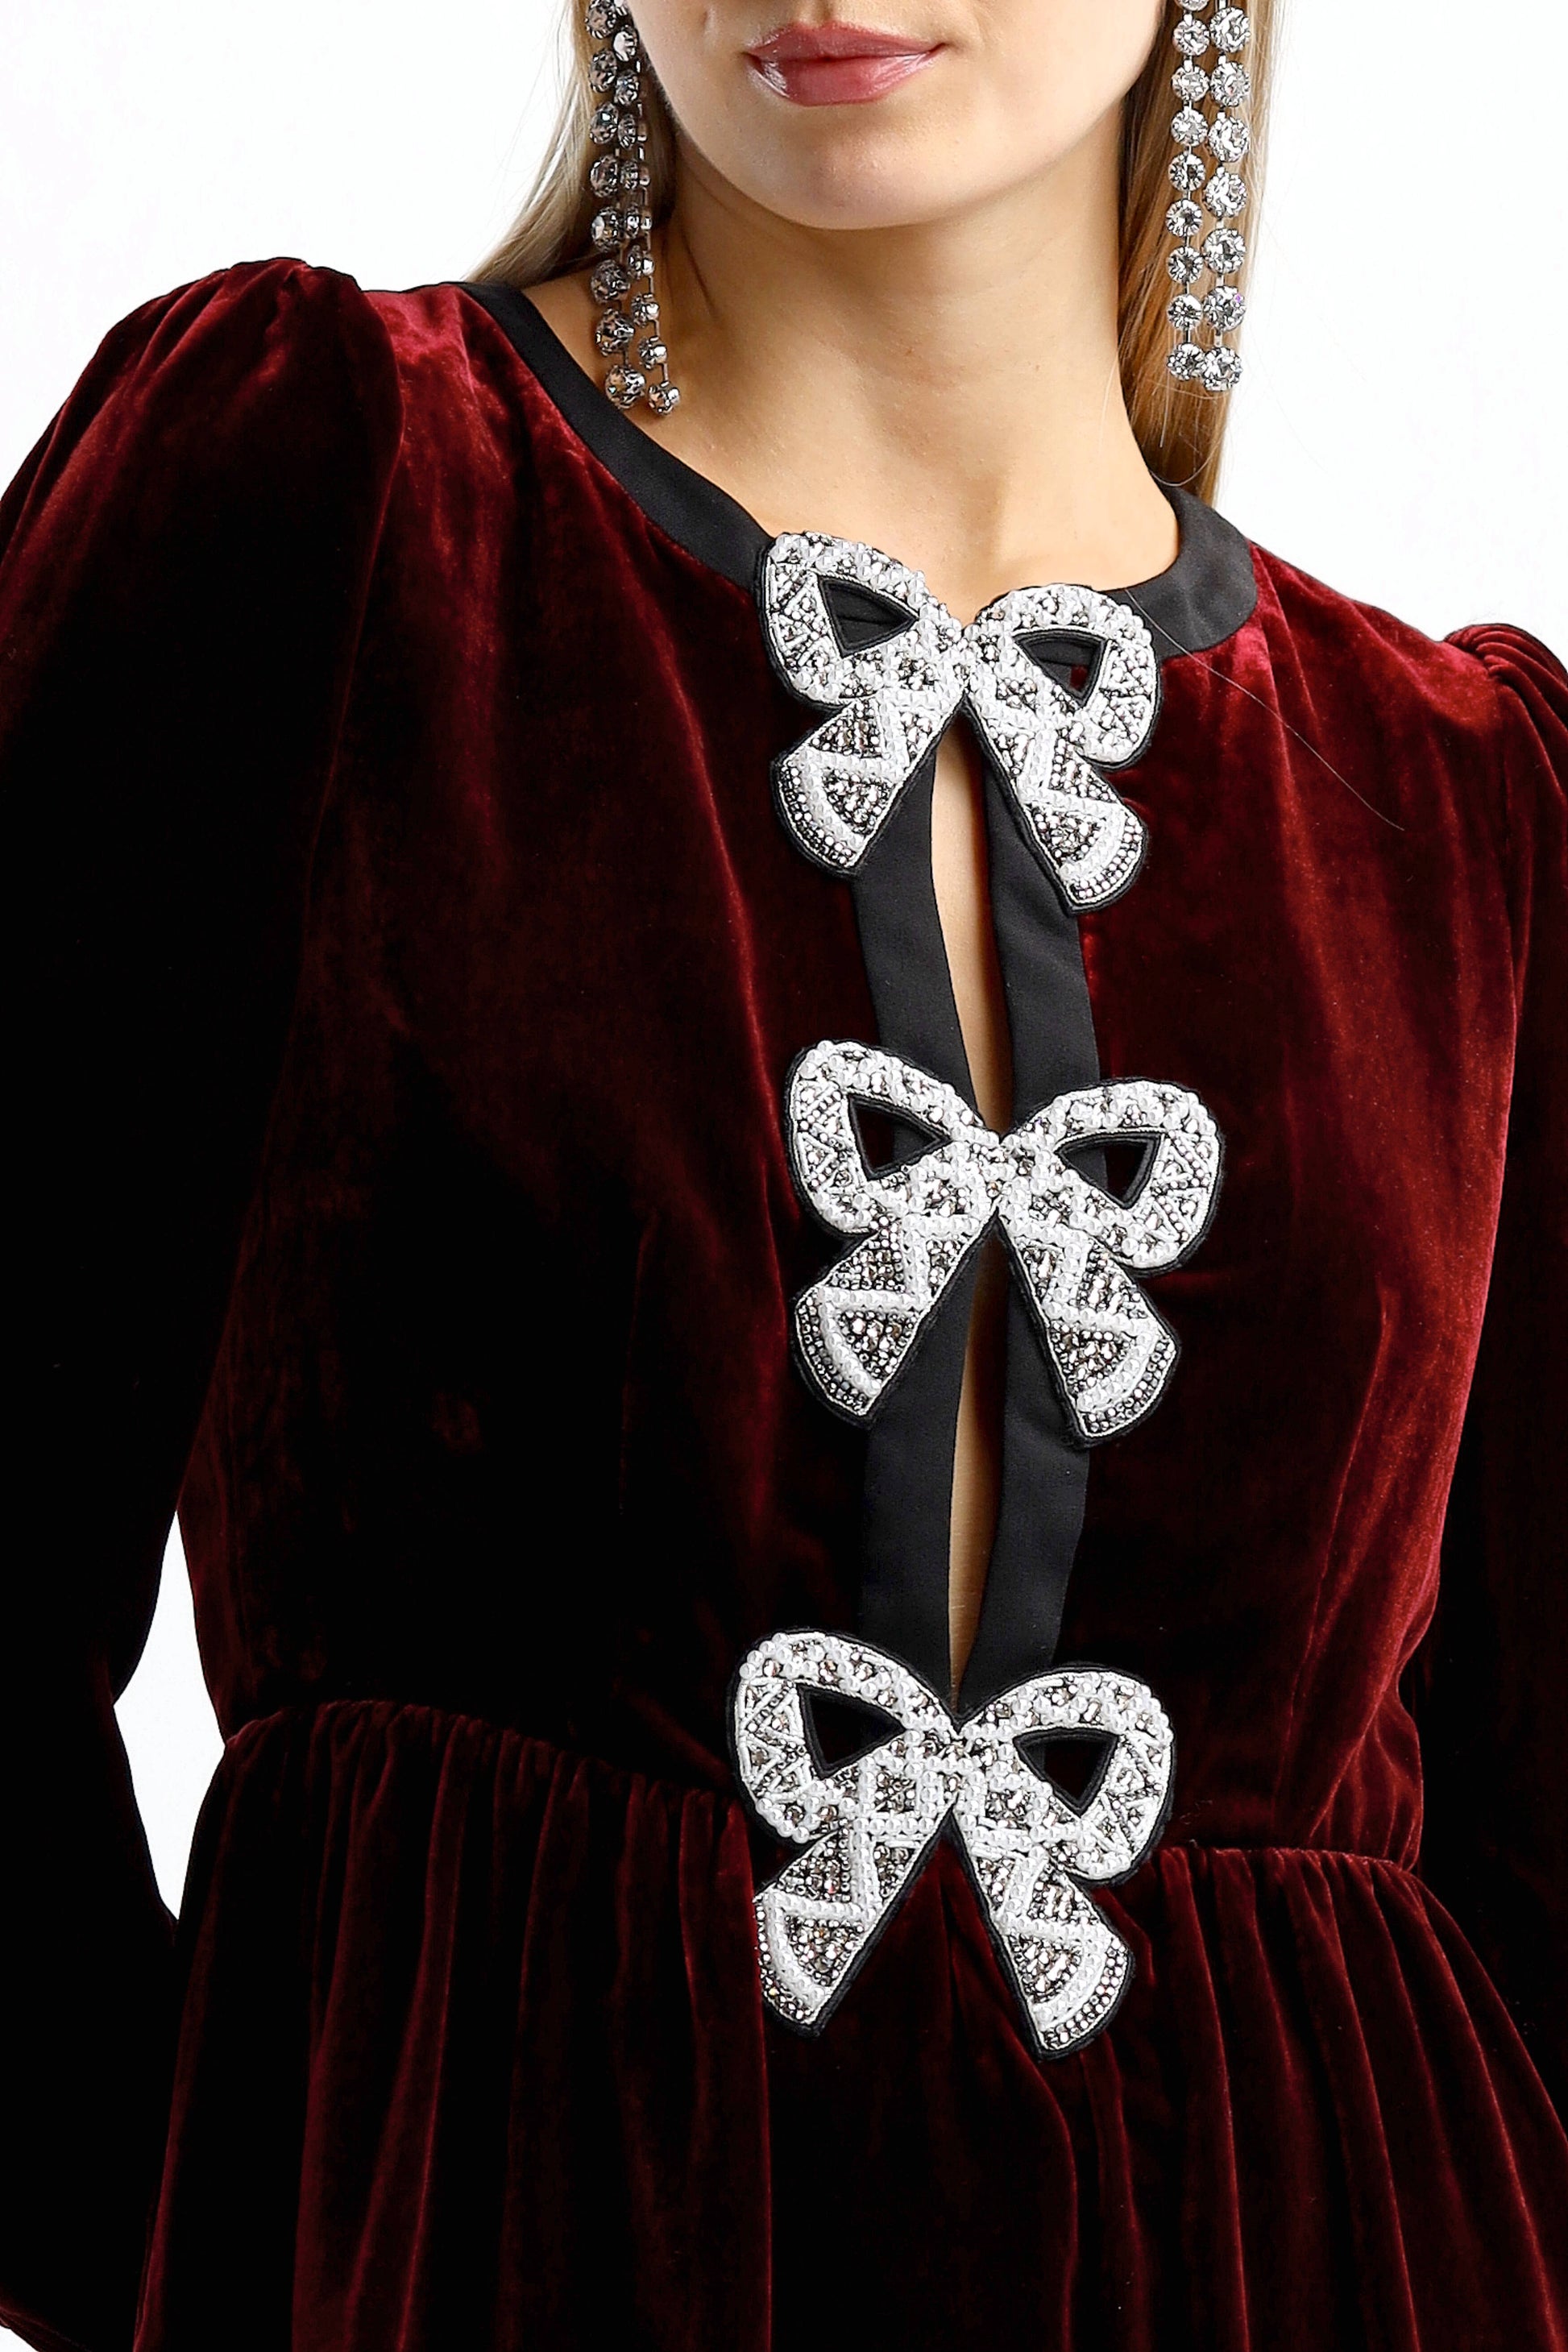 Kleid Camille Bows in Burgundy PearlSaloni - Anita Hass